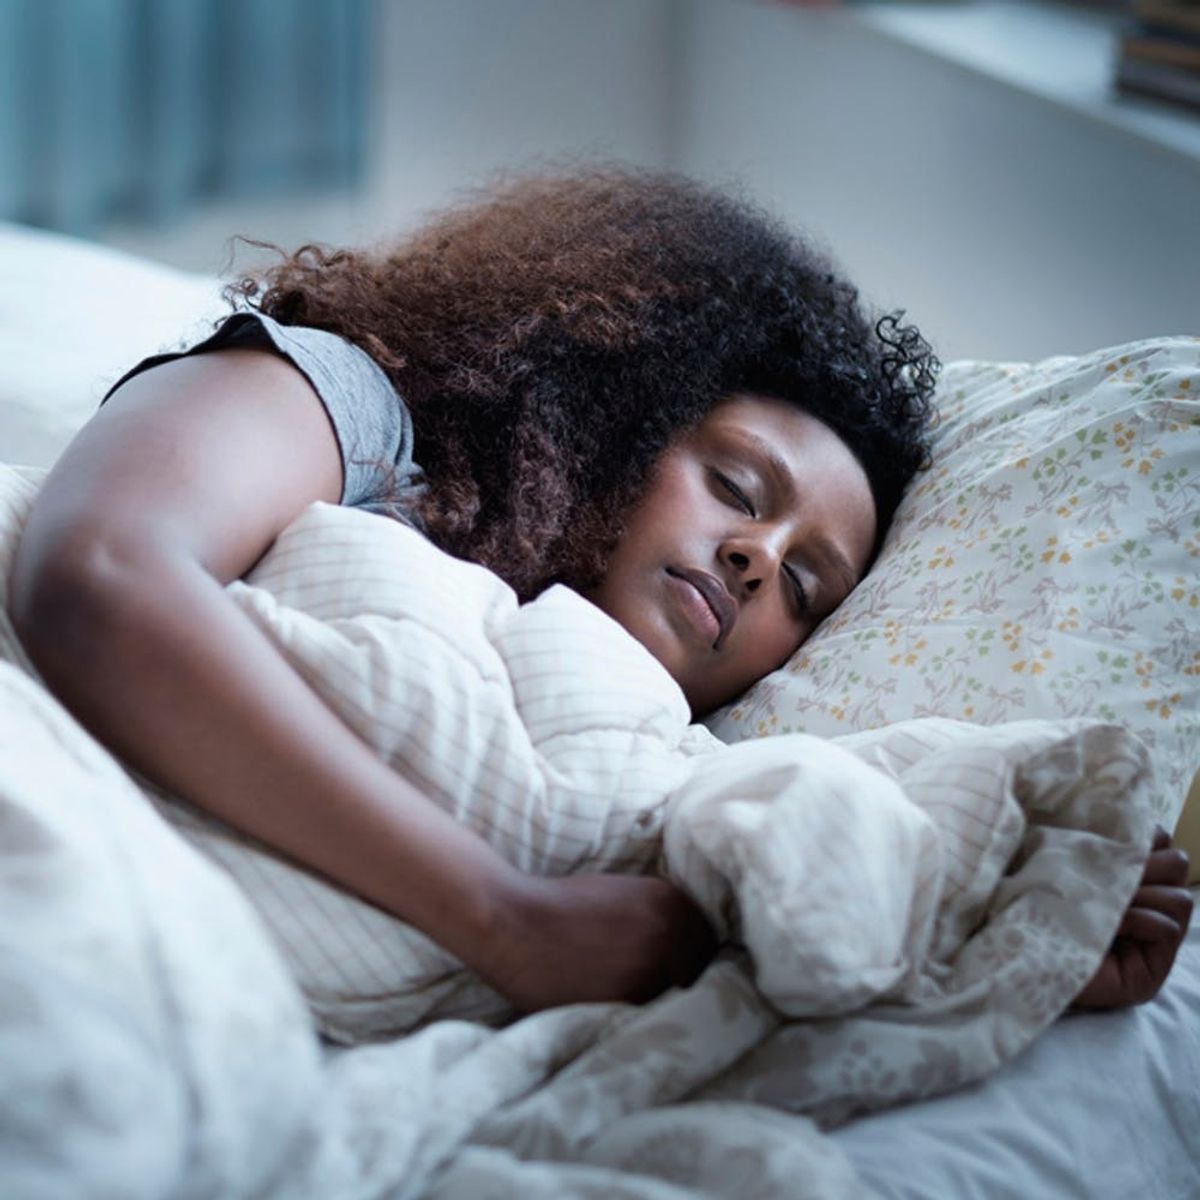 These Are the Most Sleep-Deprived Occupations